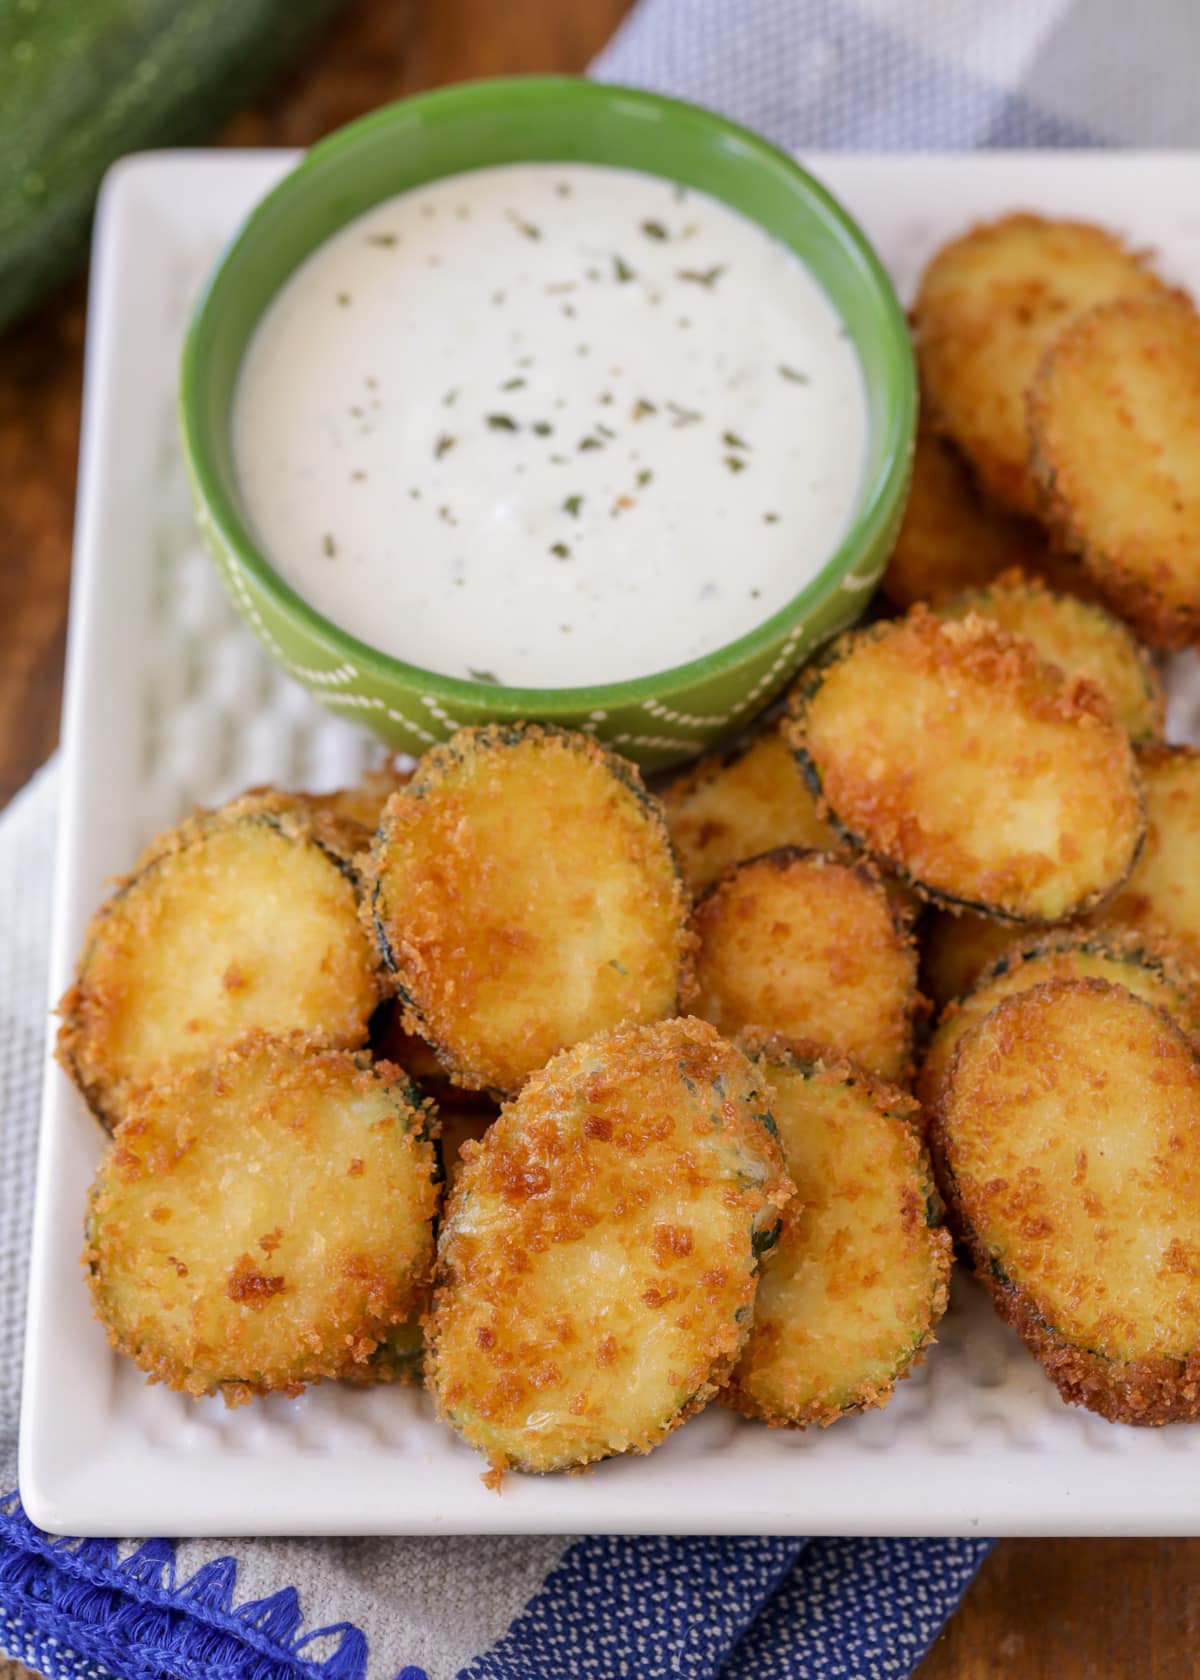 A plate of golden fried zucchini served with ranch dressing.